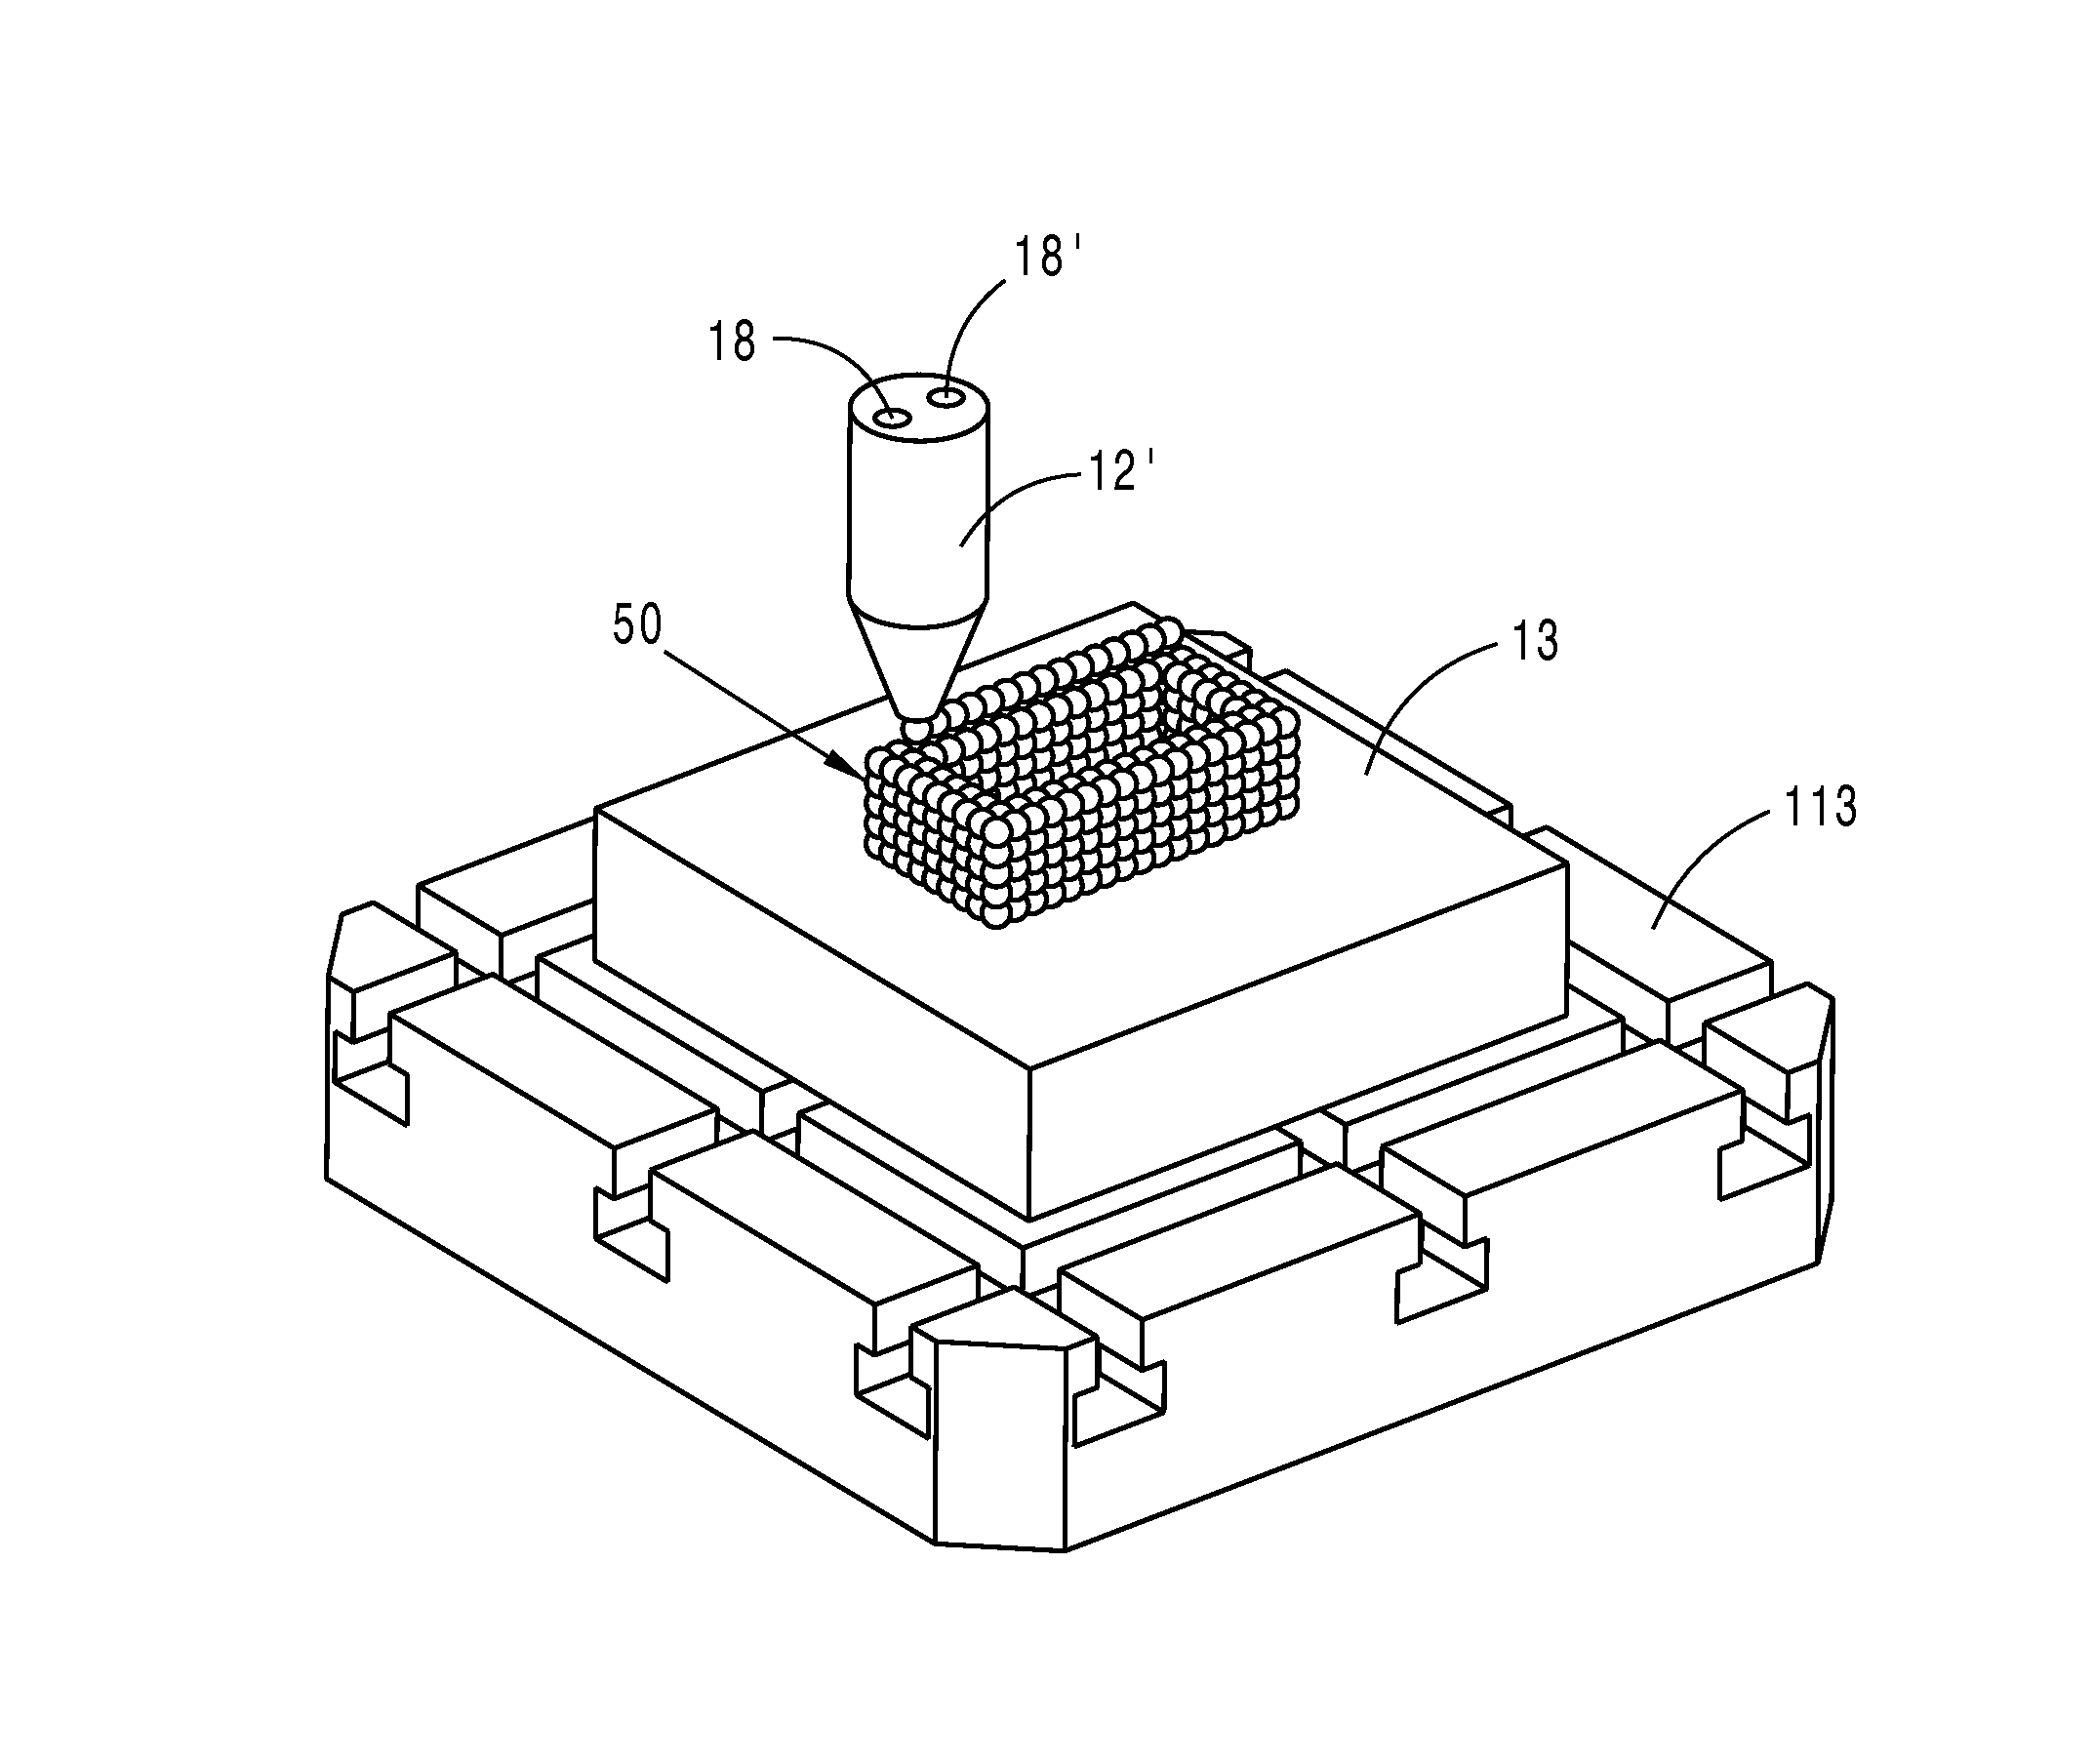 Method for producing a three-dimensional object